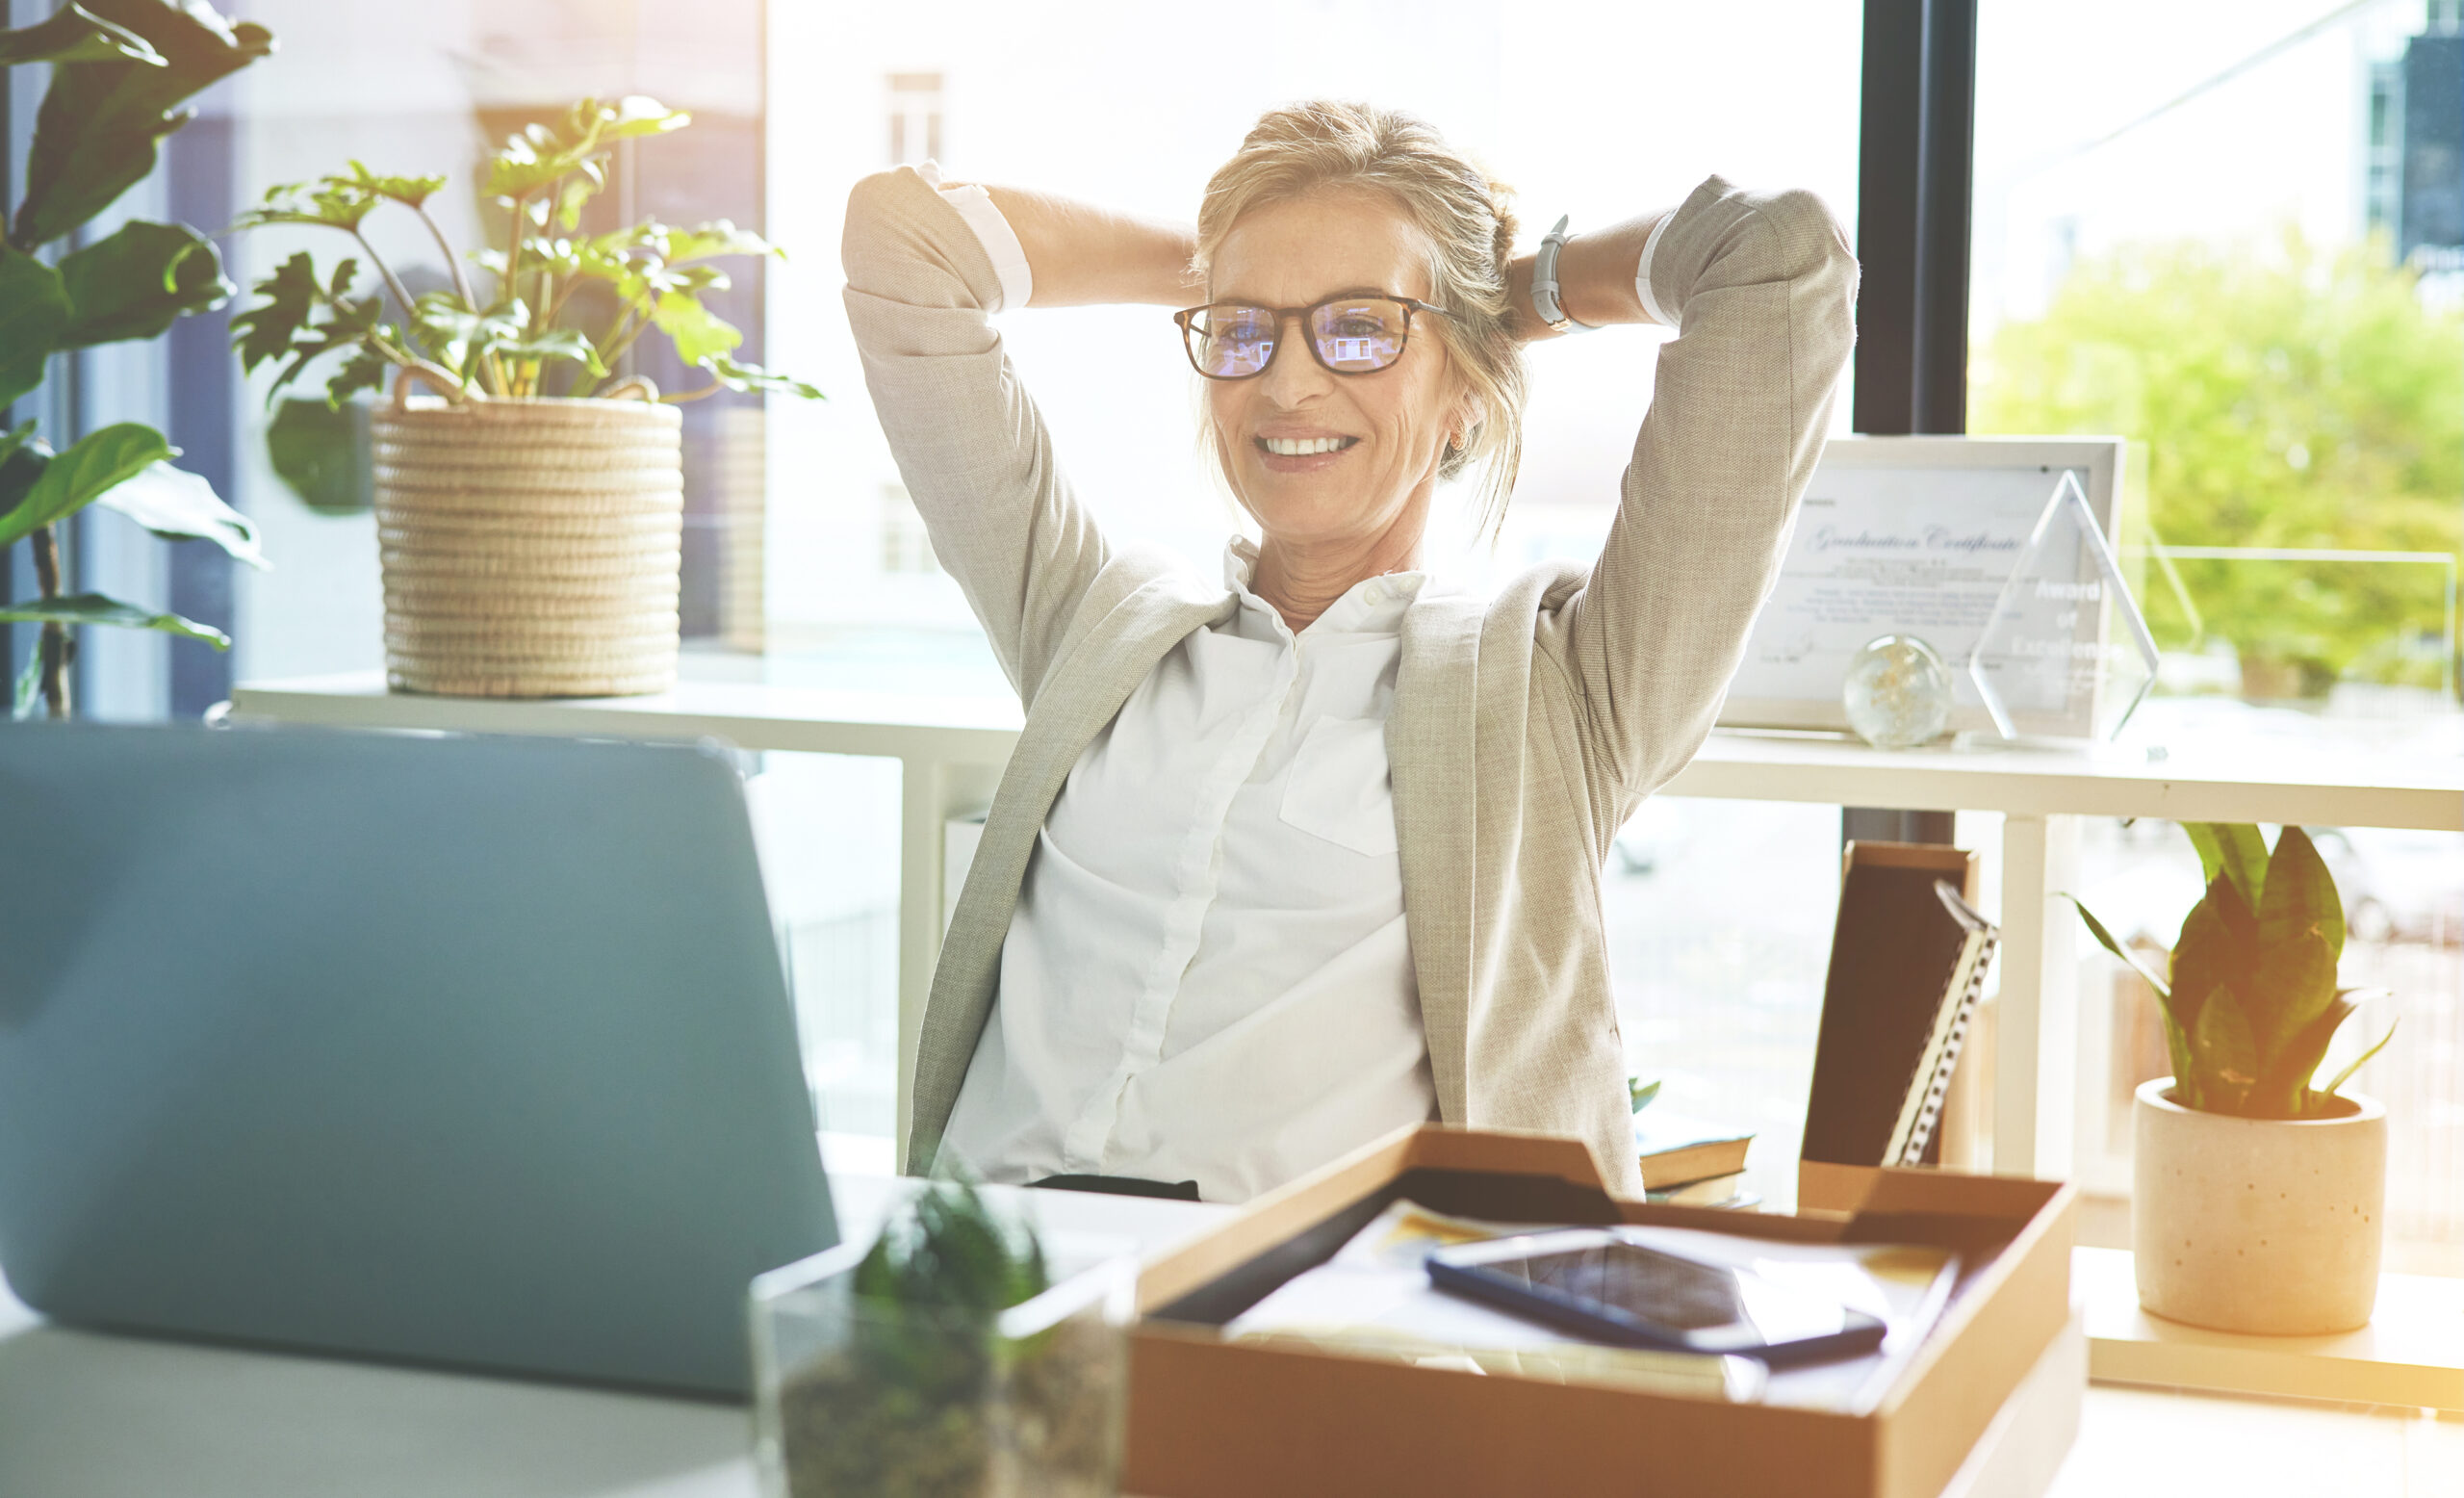 Business woman feeling accomplished and enjoying a relaxing break to stretch with hands behind her head in an office.